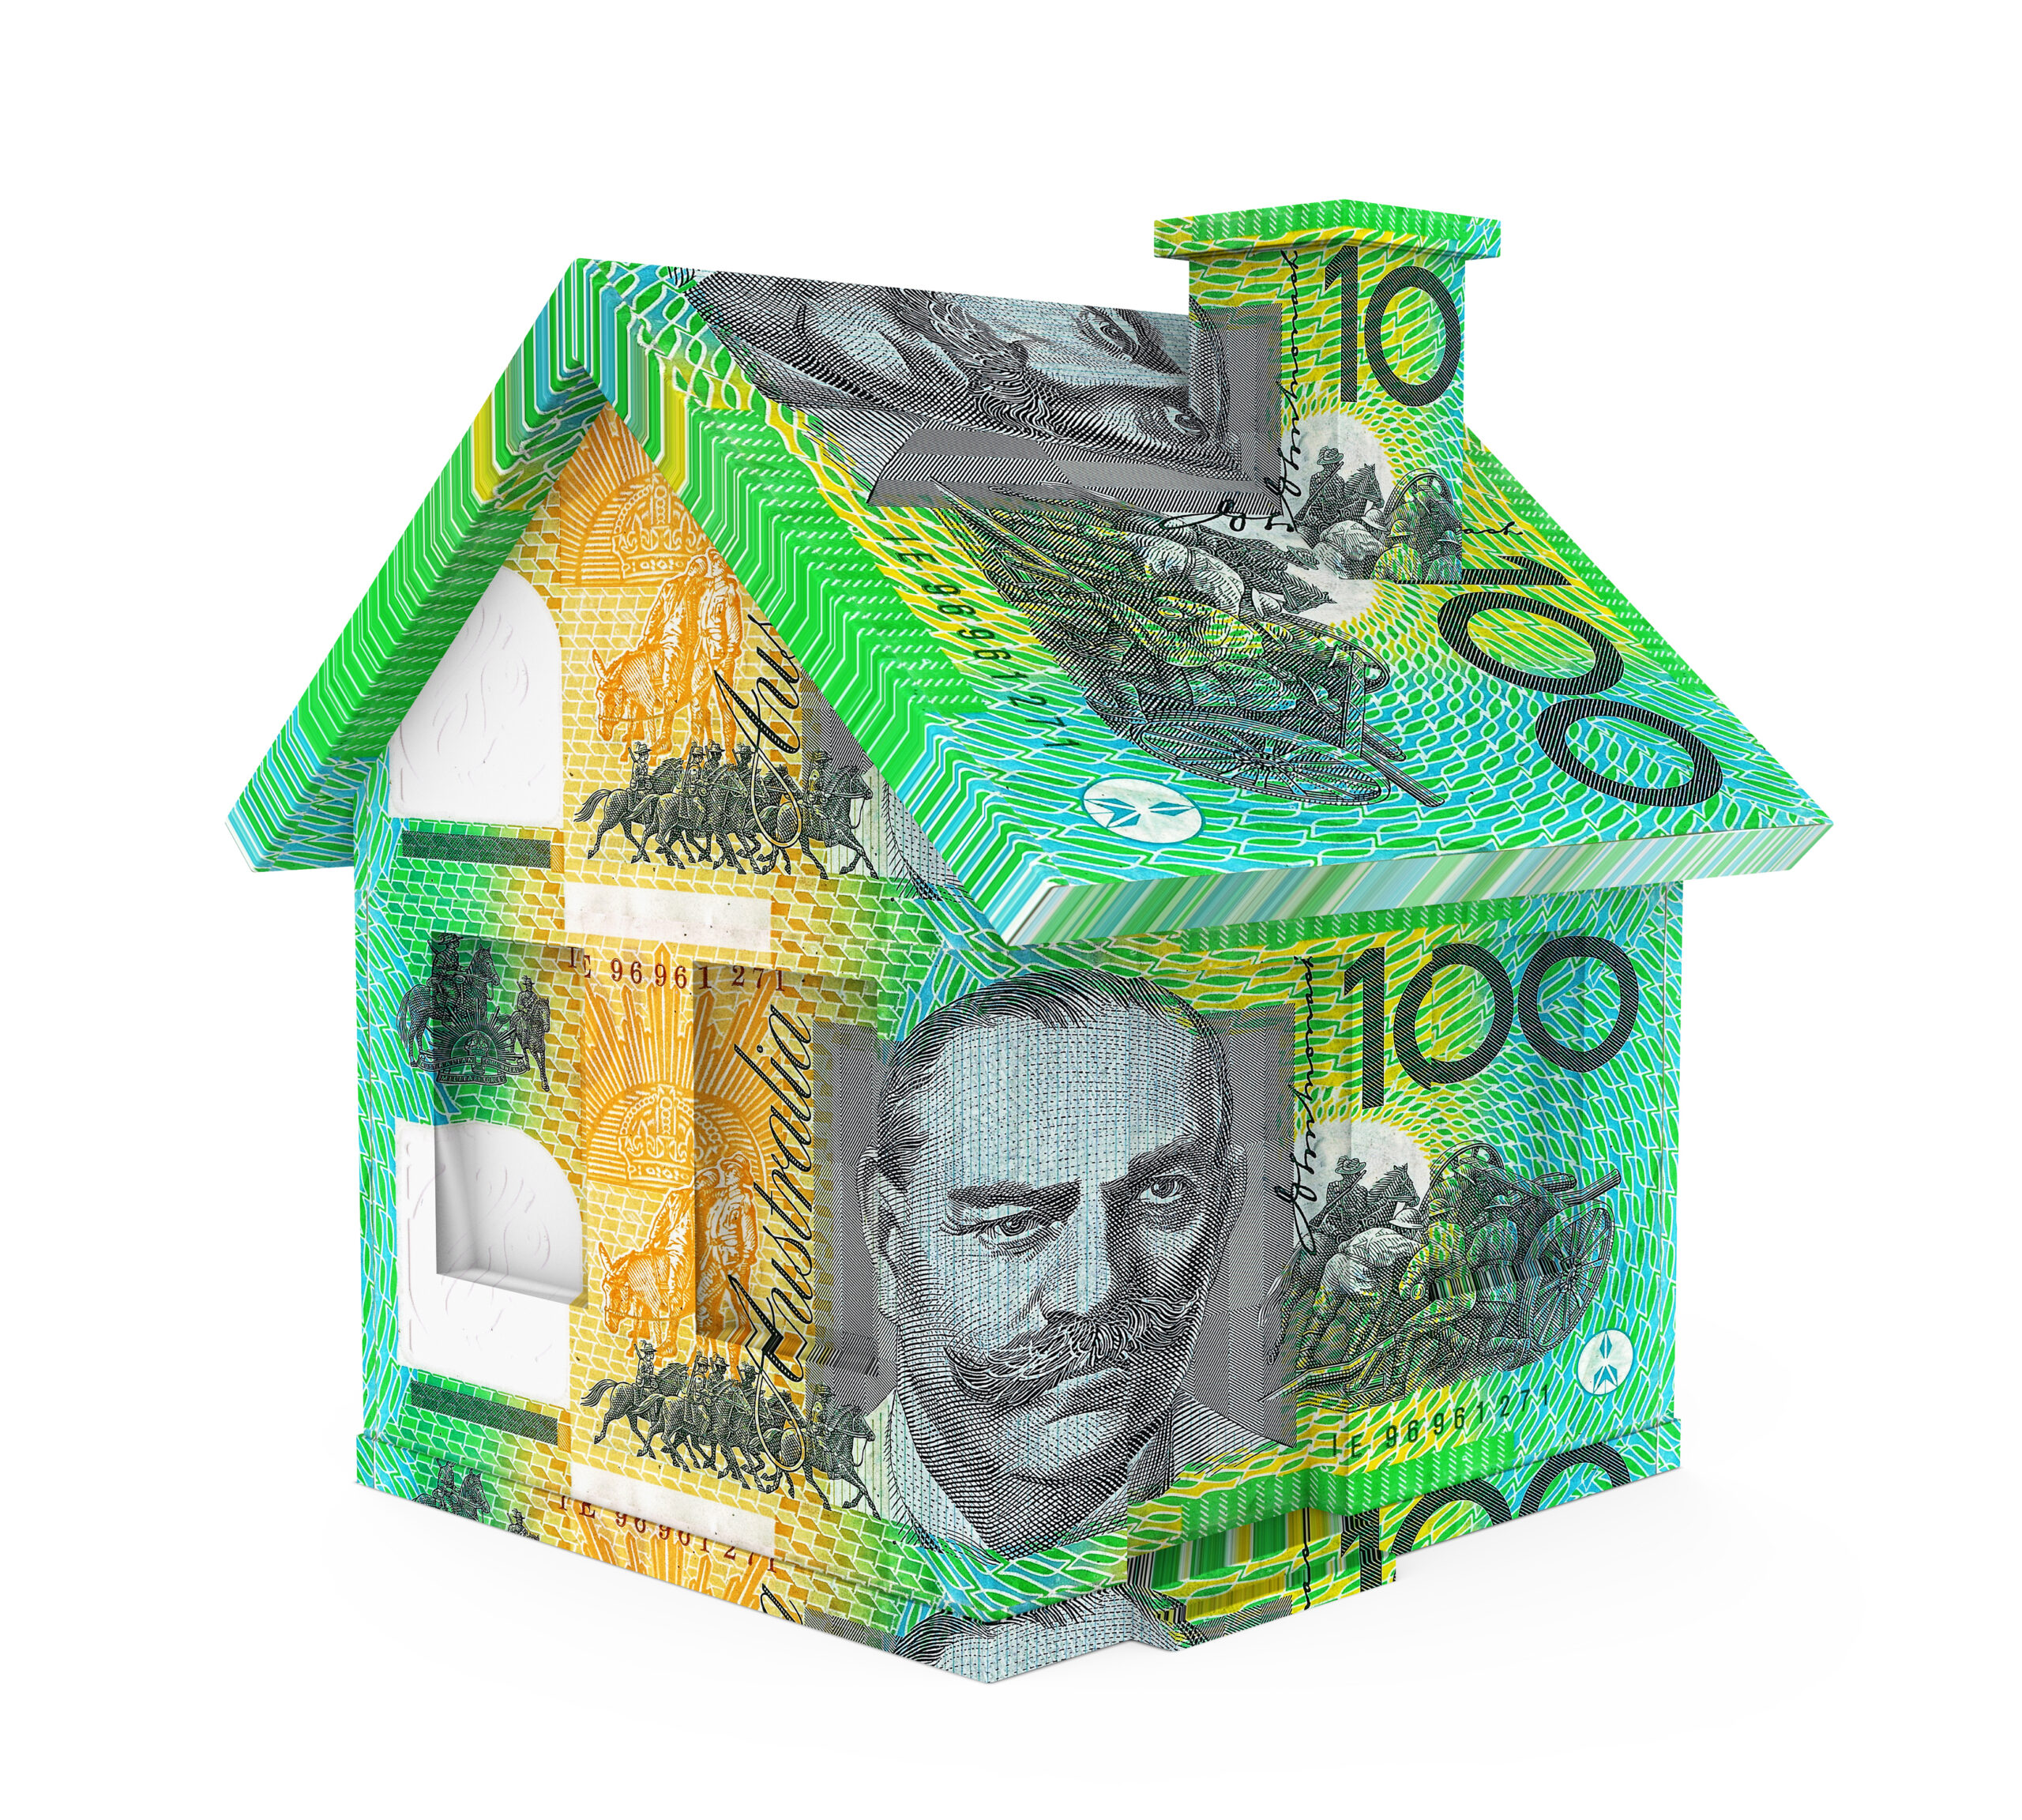 Are Australian households more vulnerable than we think?